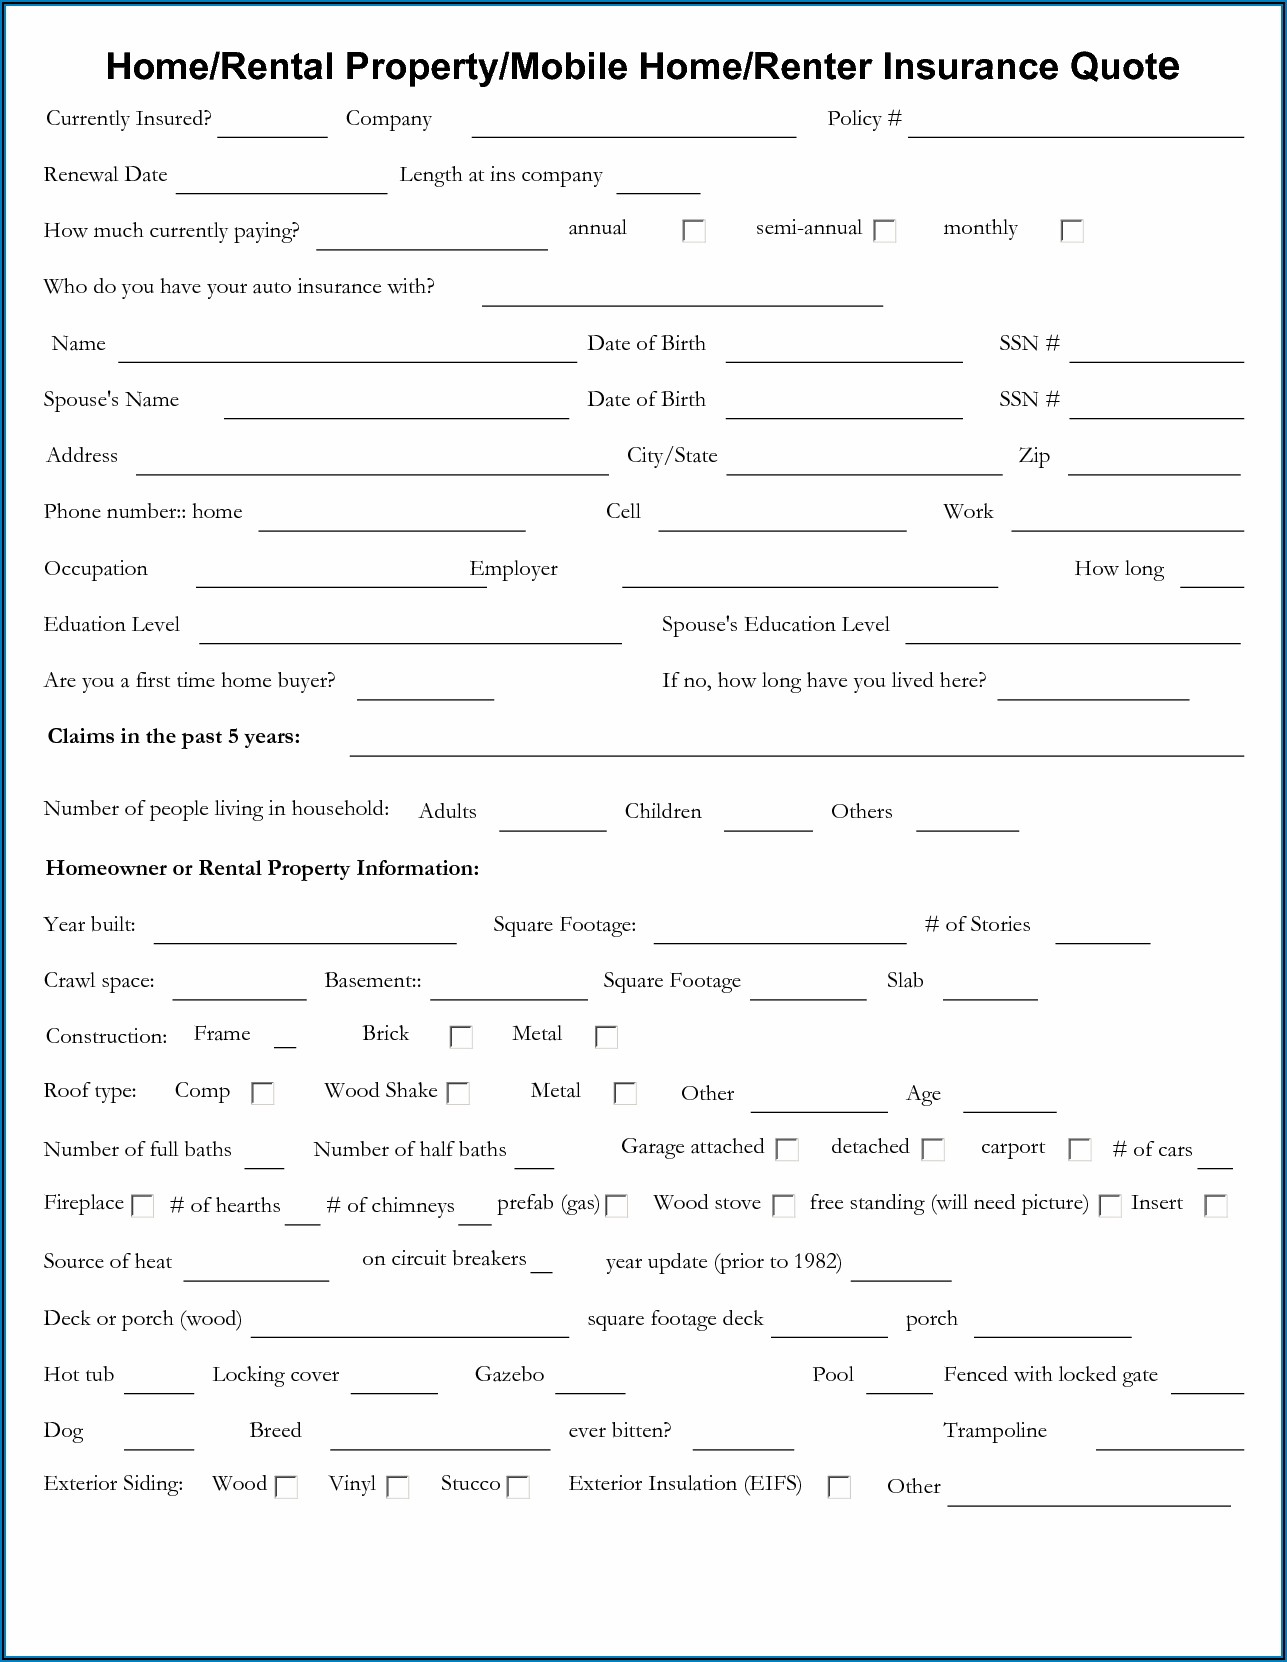 Insurance Quote Sheet Template